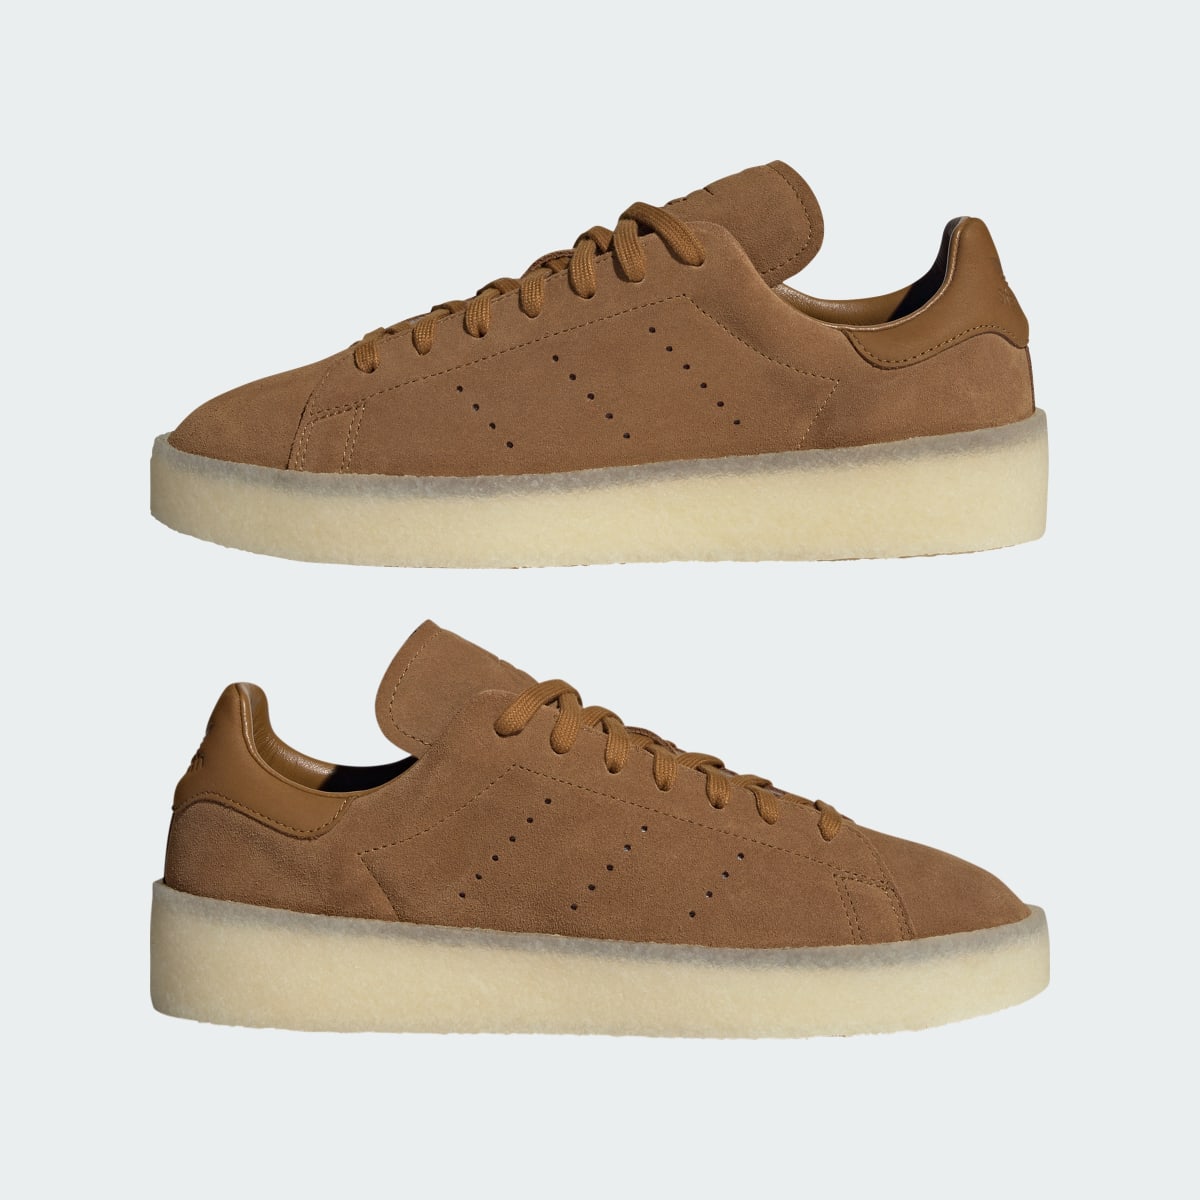 Adidas Stan Smith Crepe Shoes. 11